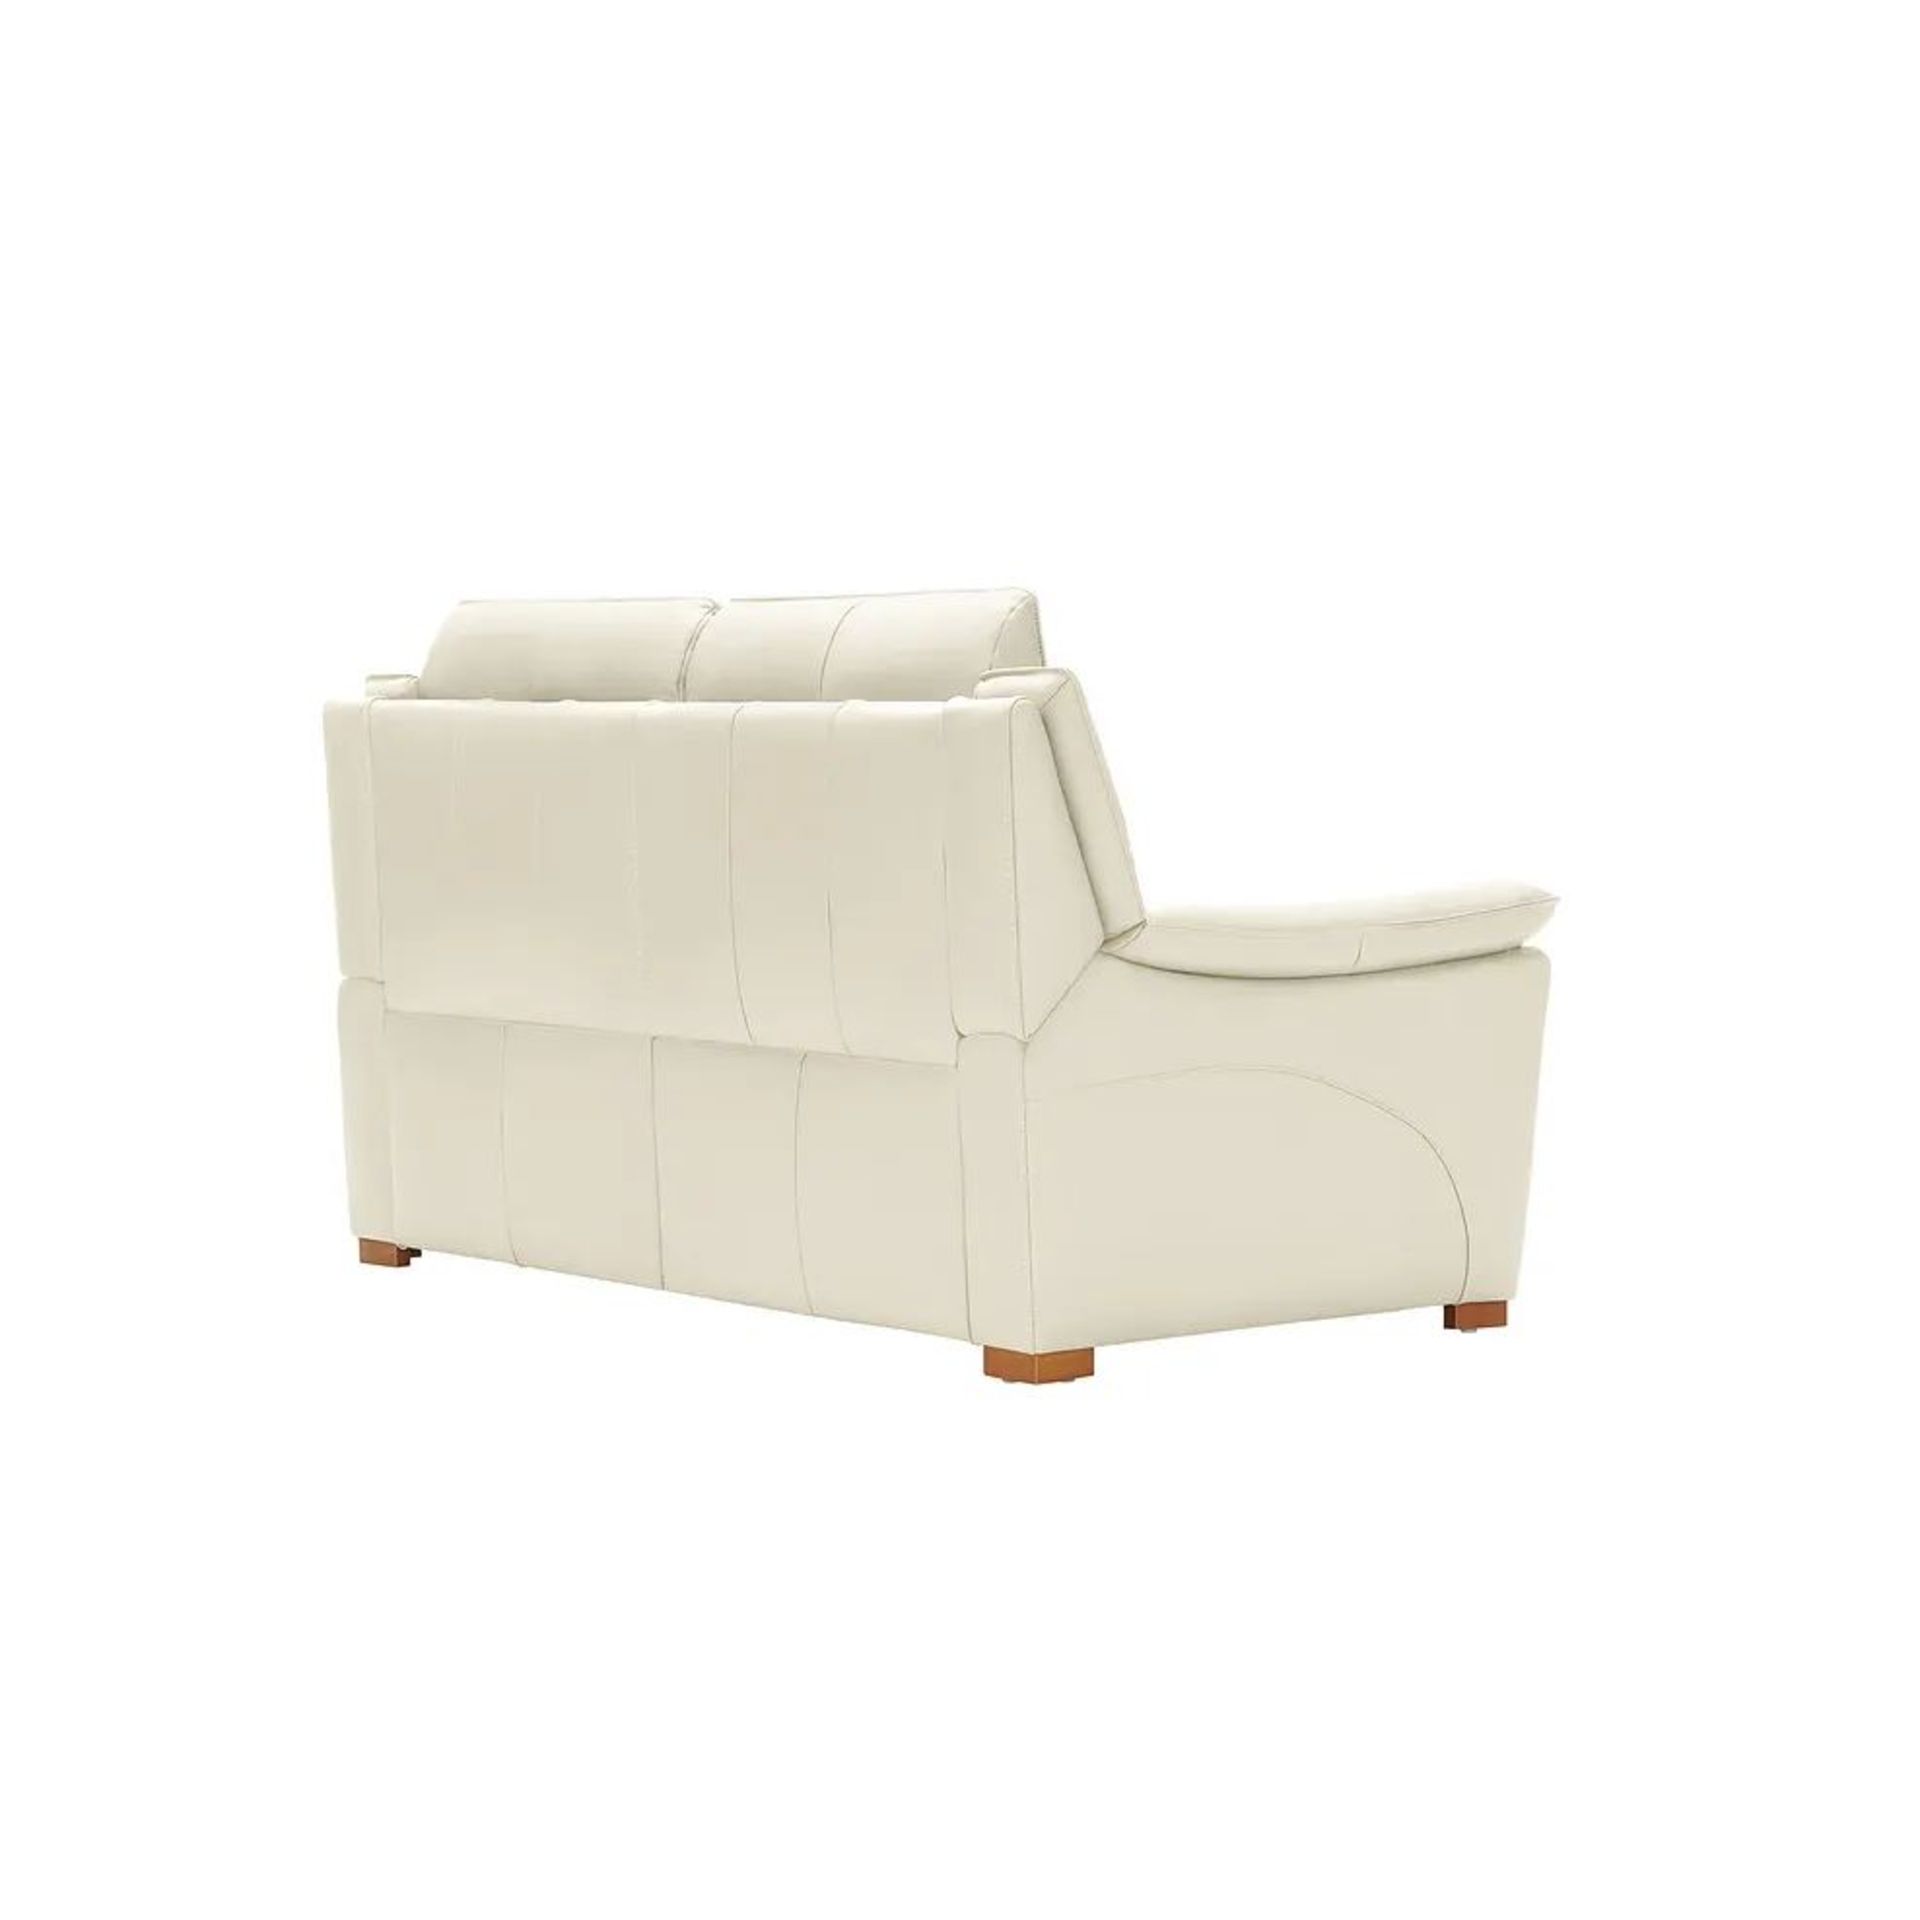 BRAND NEW DUNE 2 Seater Sofa - SNOW WHITE LEATHER. RRP £1579. Pairing comfort with classic design, - Image 3 of 8